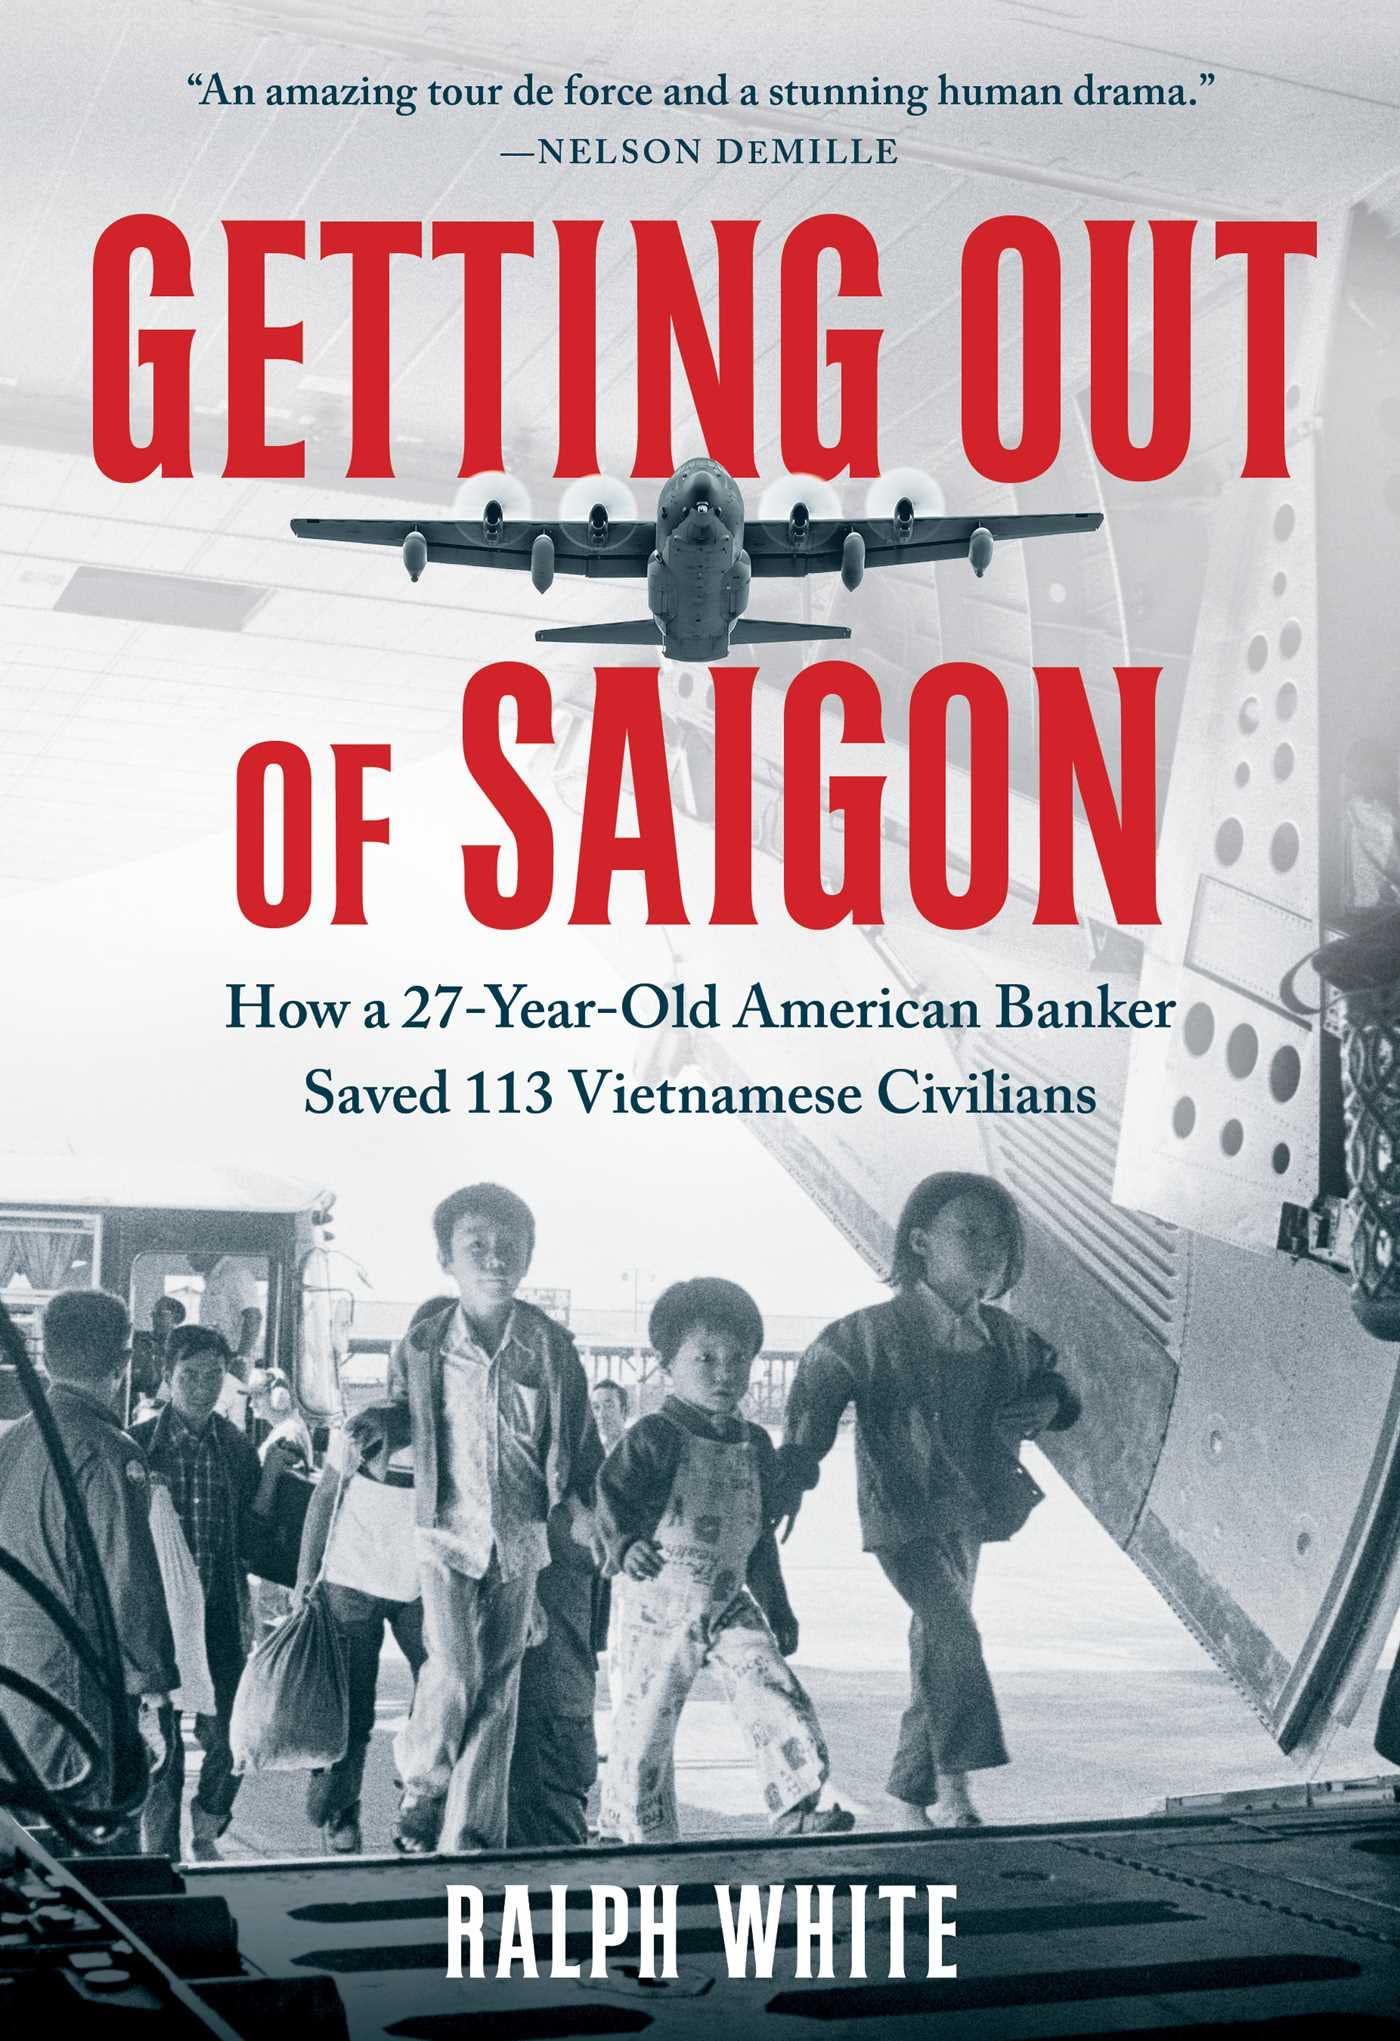 Image for "Getting Out of Saigon"